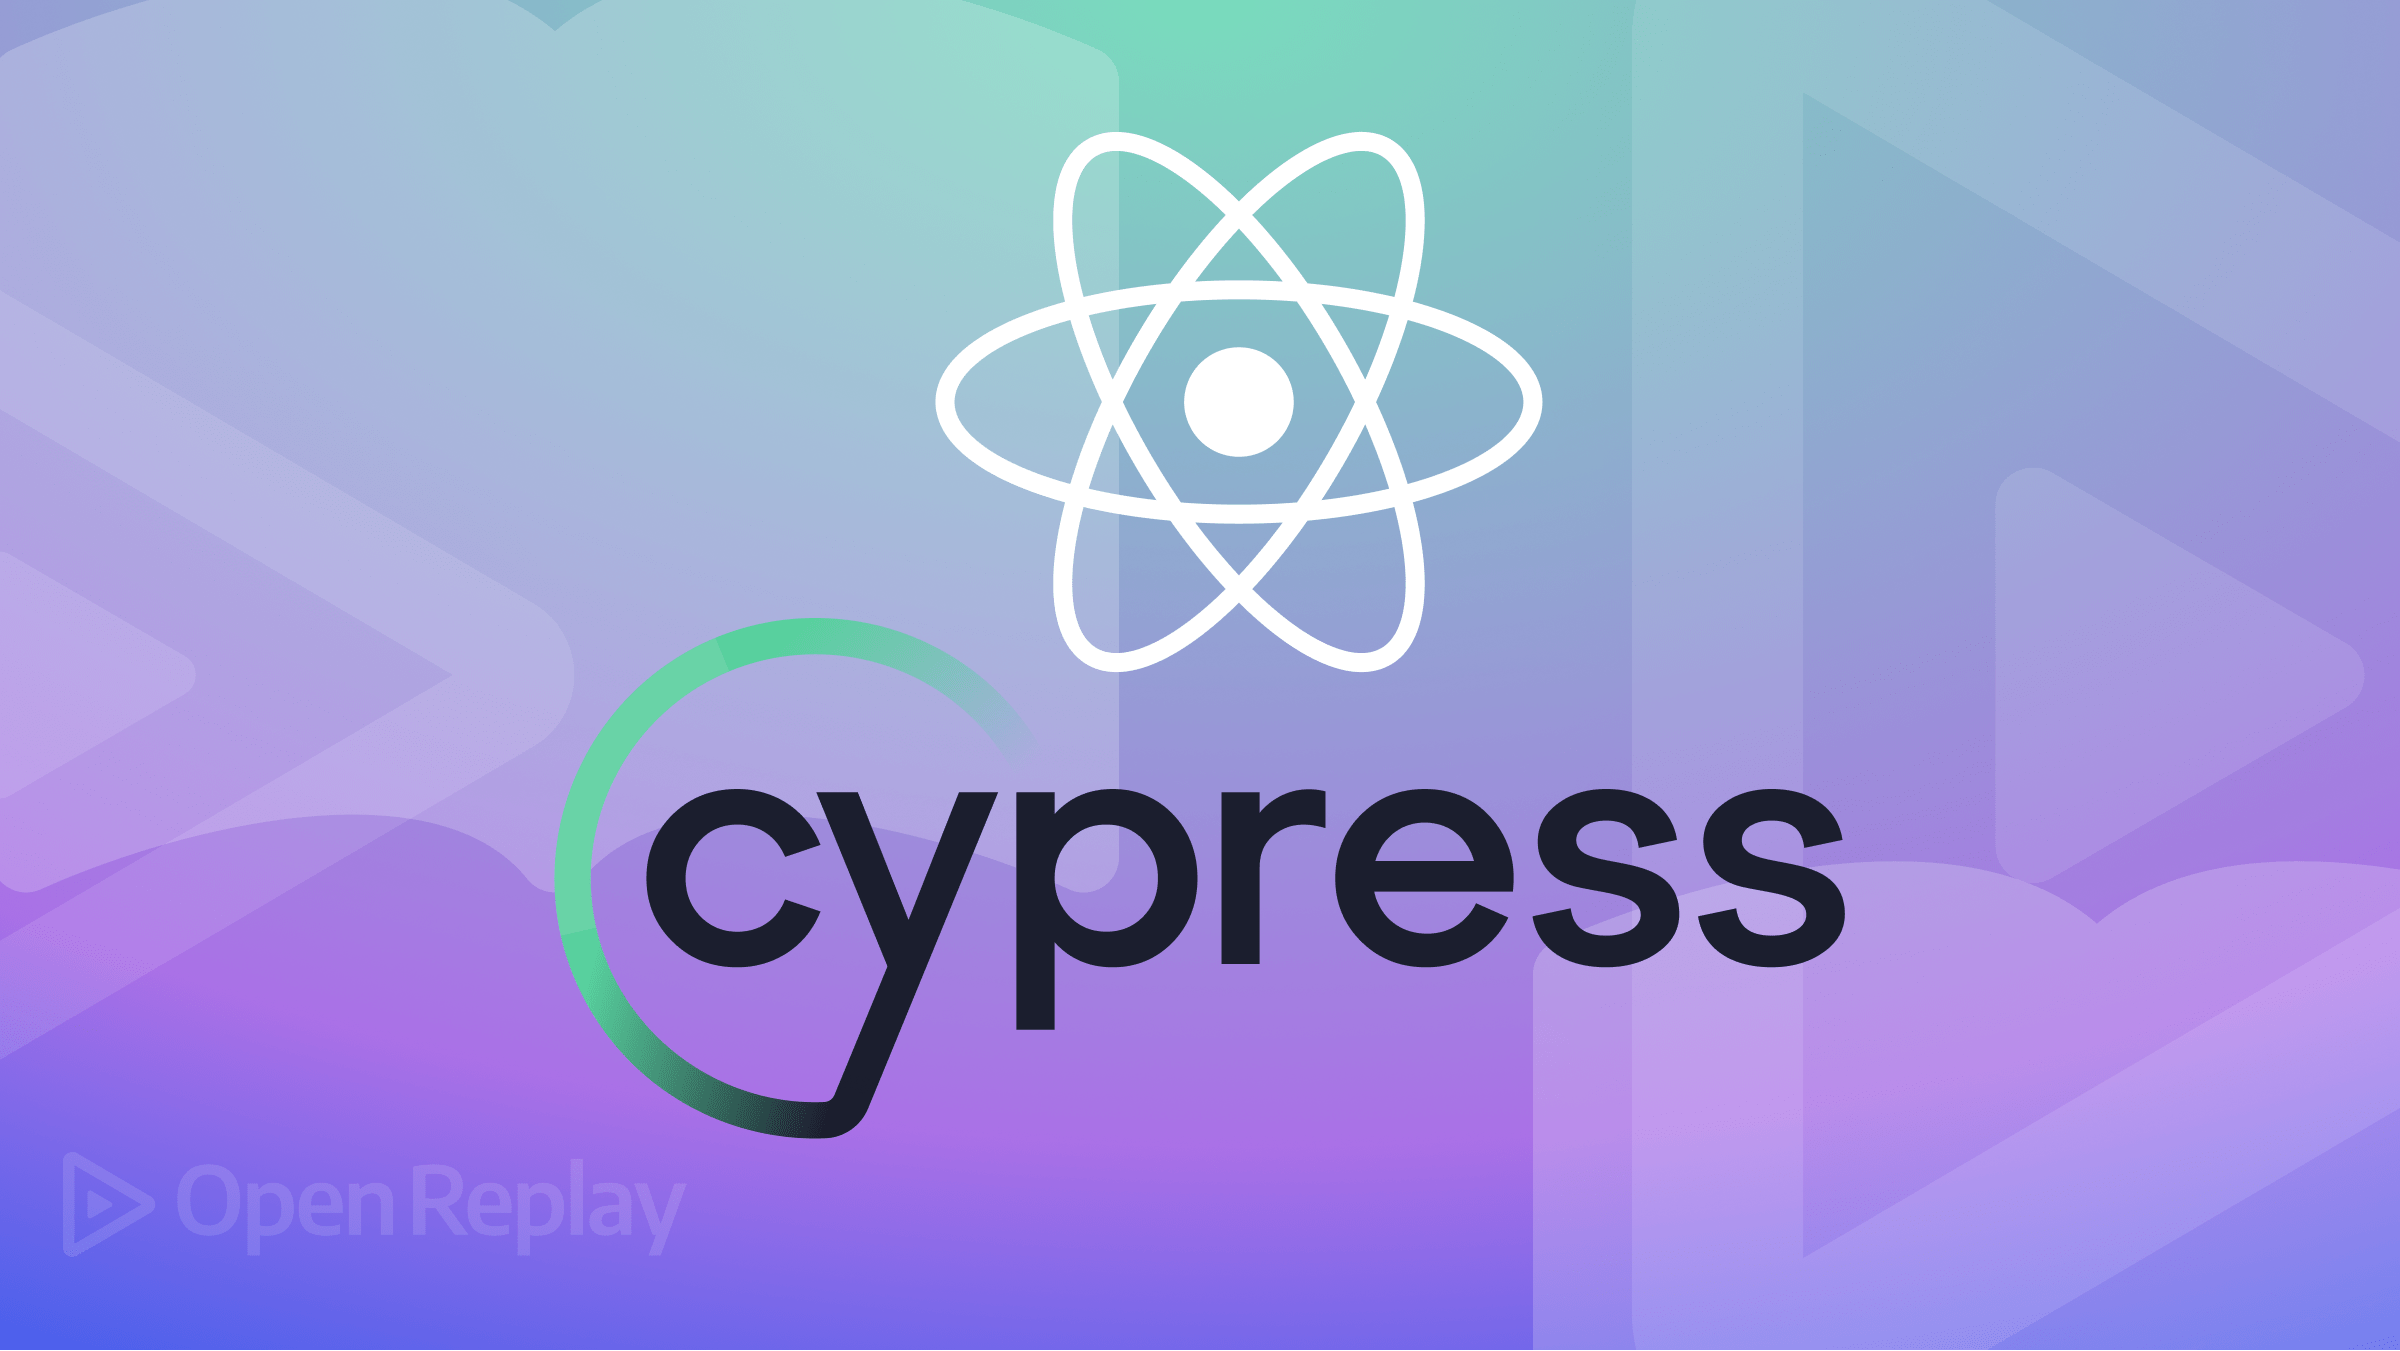 End-to-end (E2E) testing with Cypress